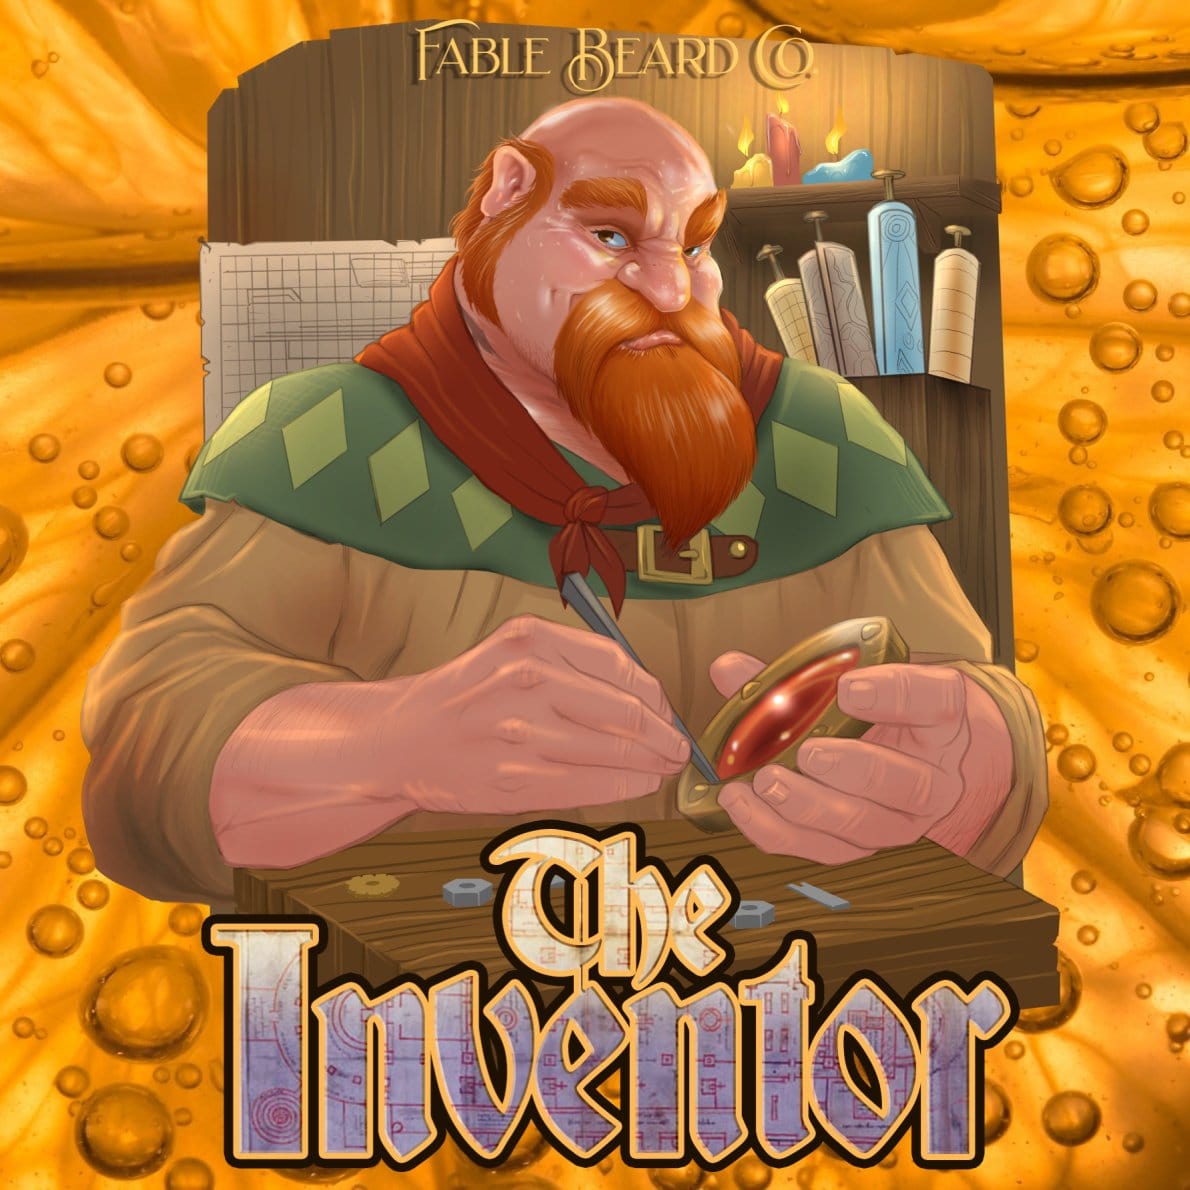 The Inventor - Exotic Citrus Cologne Beard Oil